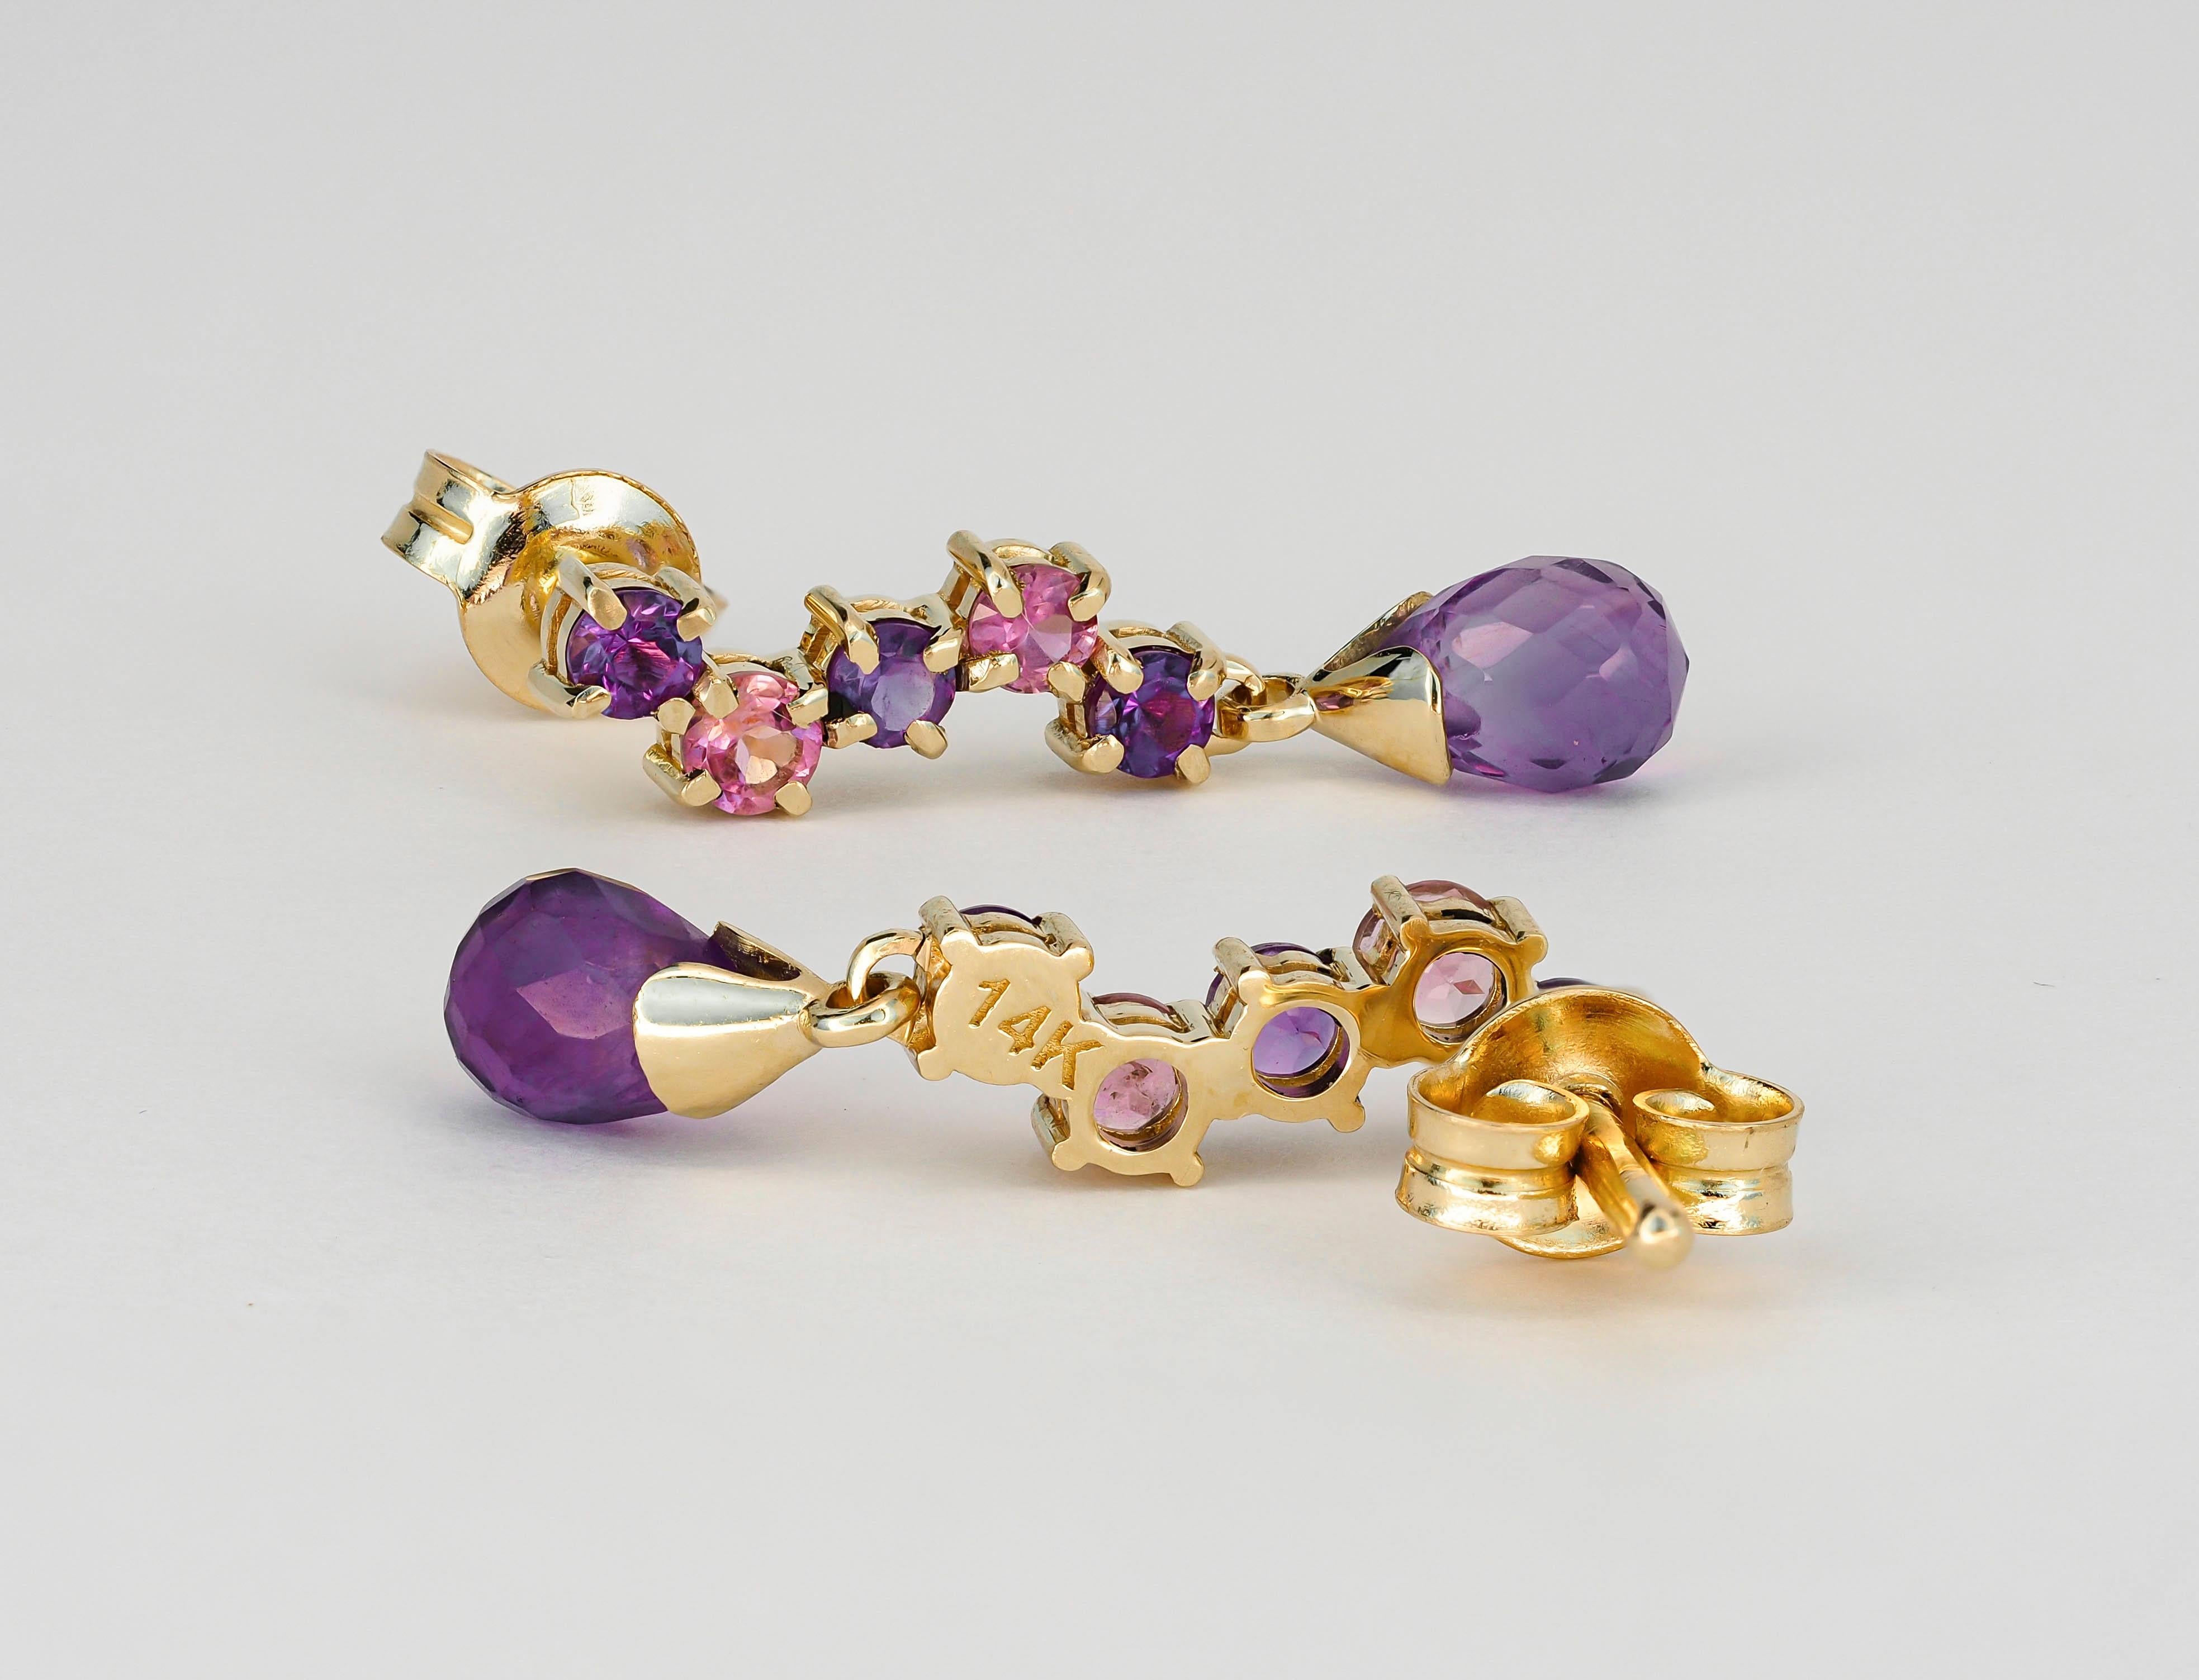 Women's 14k gold earrings with amethysts and sapphires